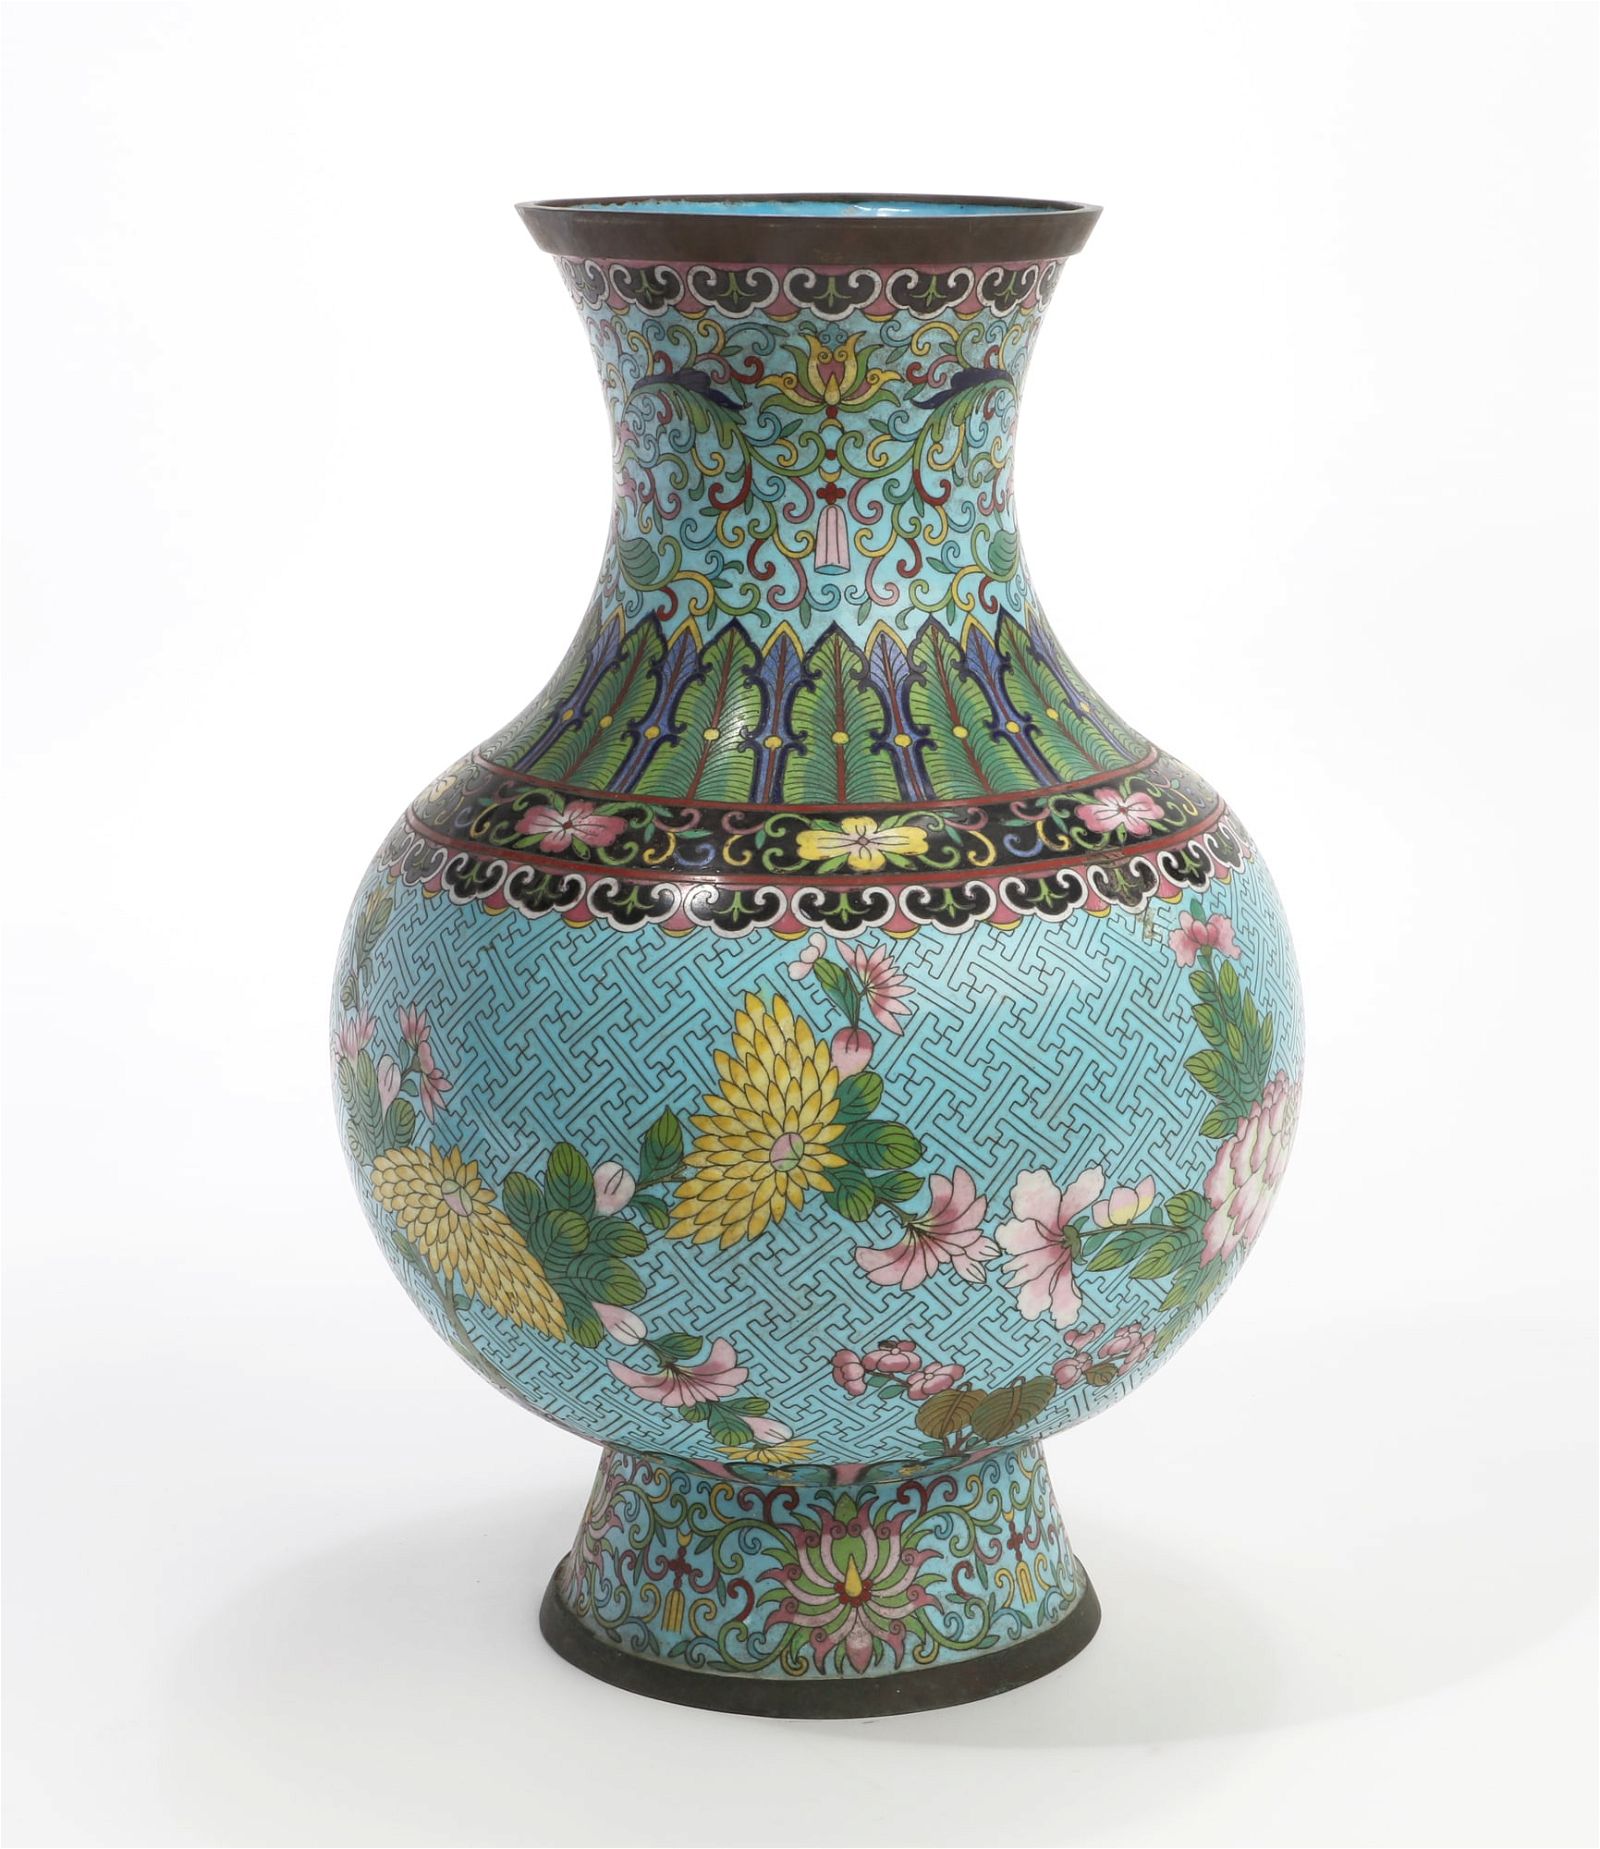 A CHINESE CLOISONNE VASEA Chinese